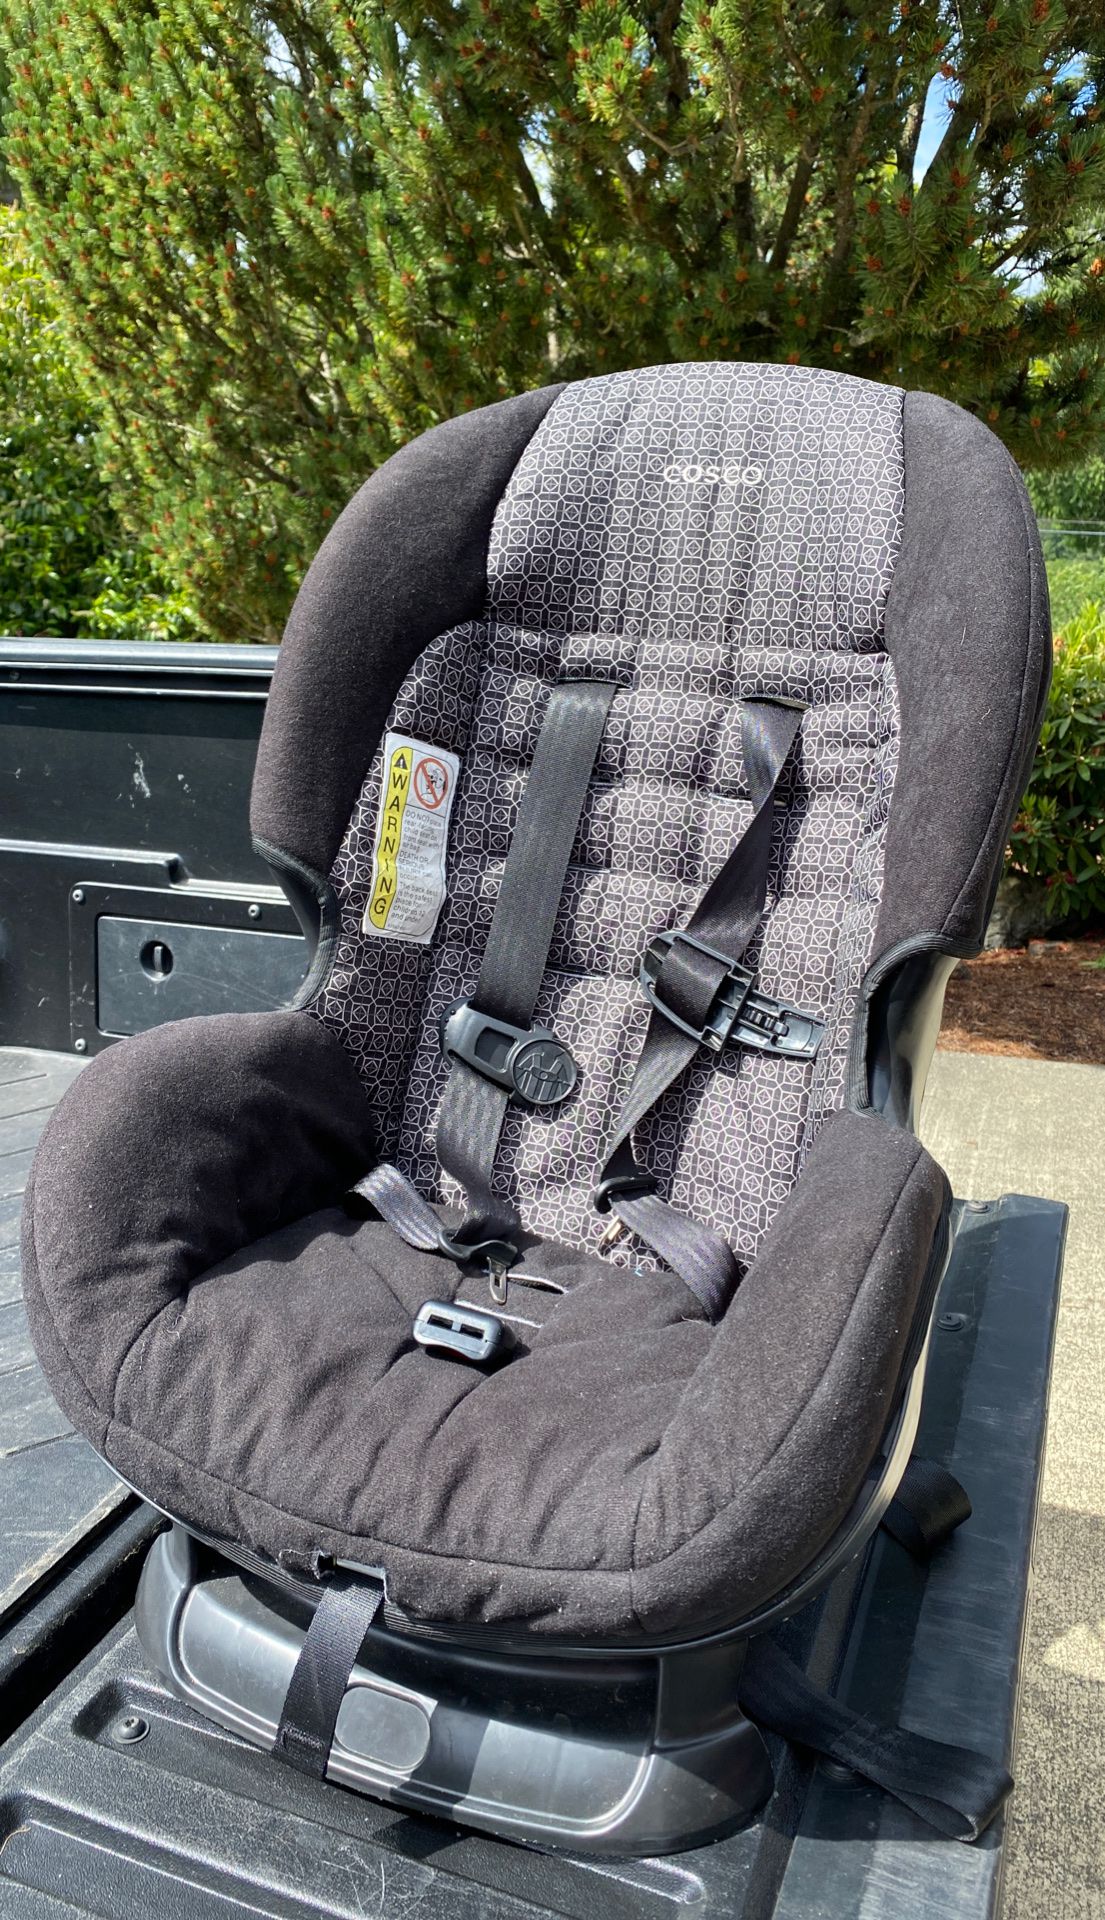 Cosco car seat FREE. Outgrown this size. Used at most once a week by my grandchild.